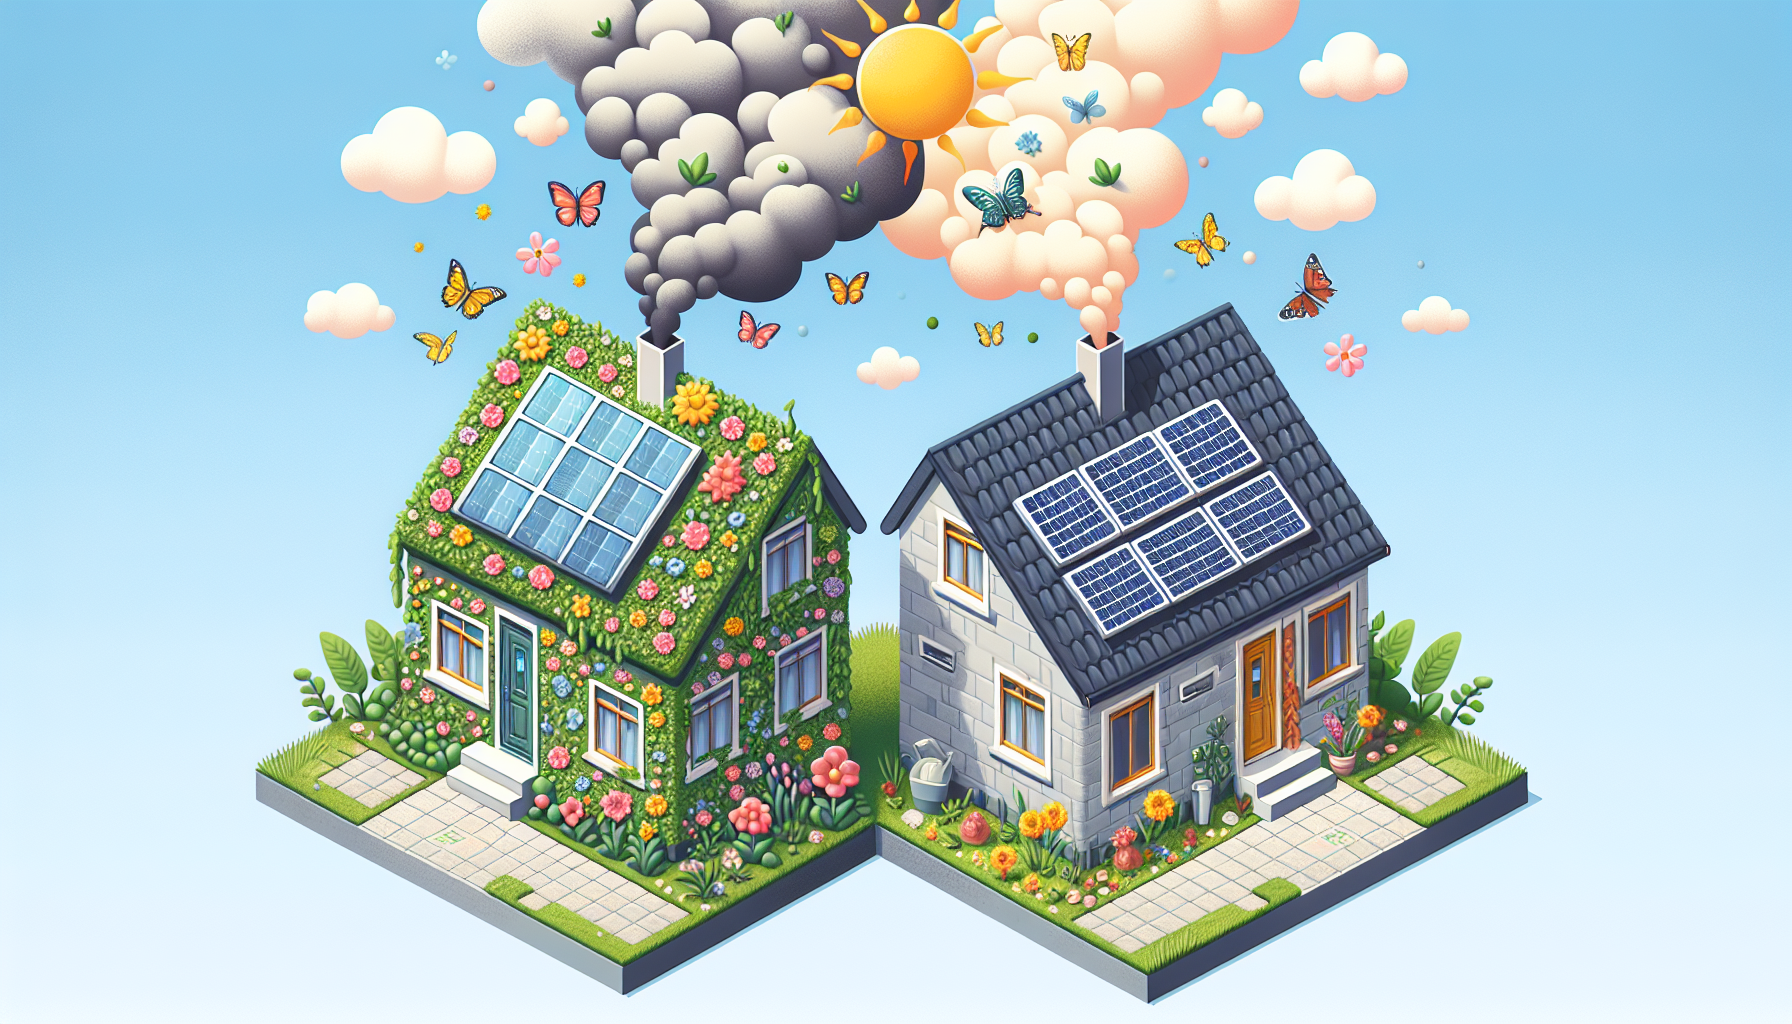 Comparison of carbon footprint with and without solar panels